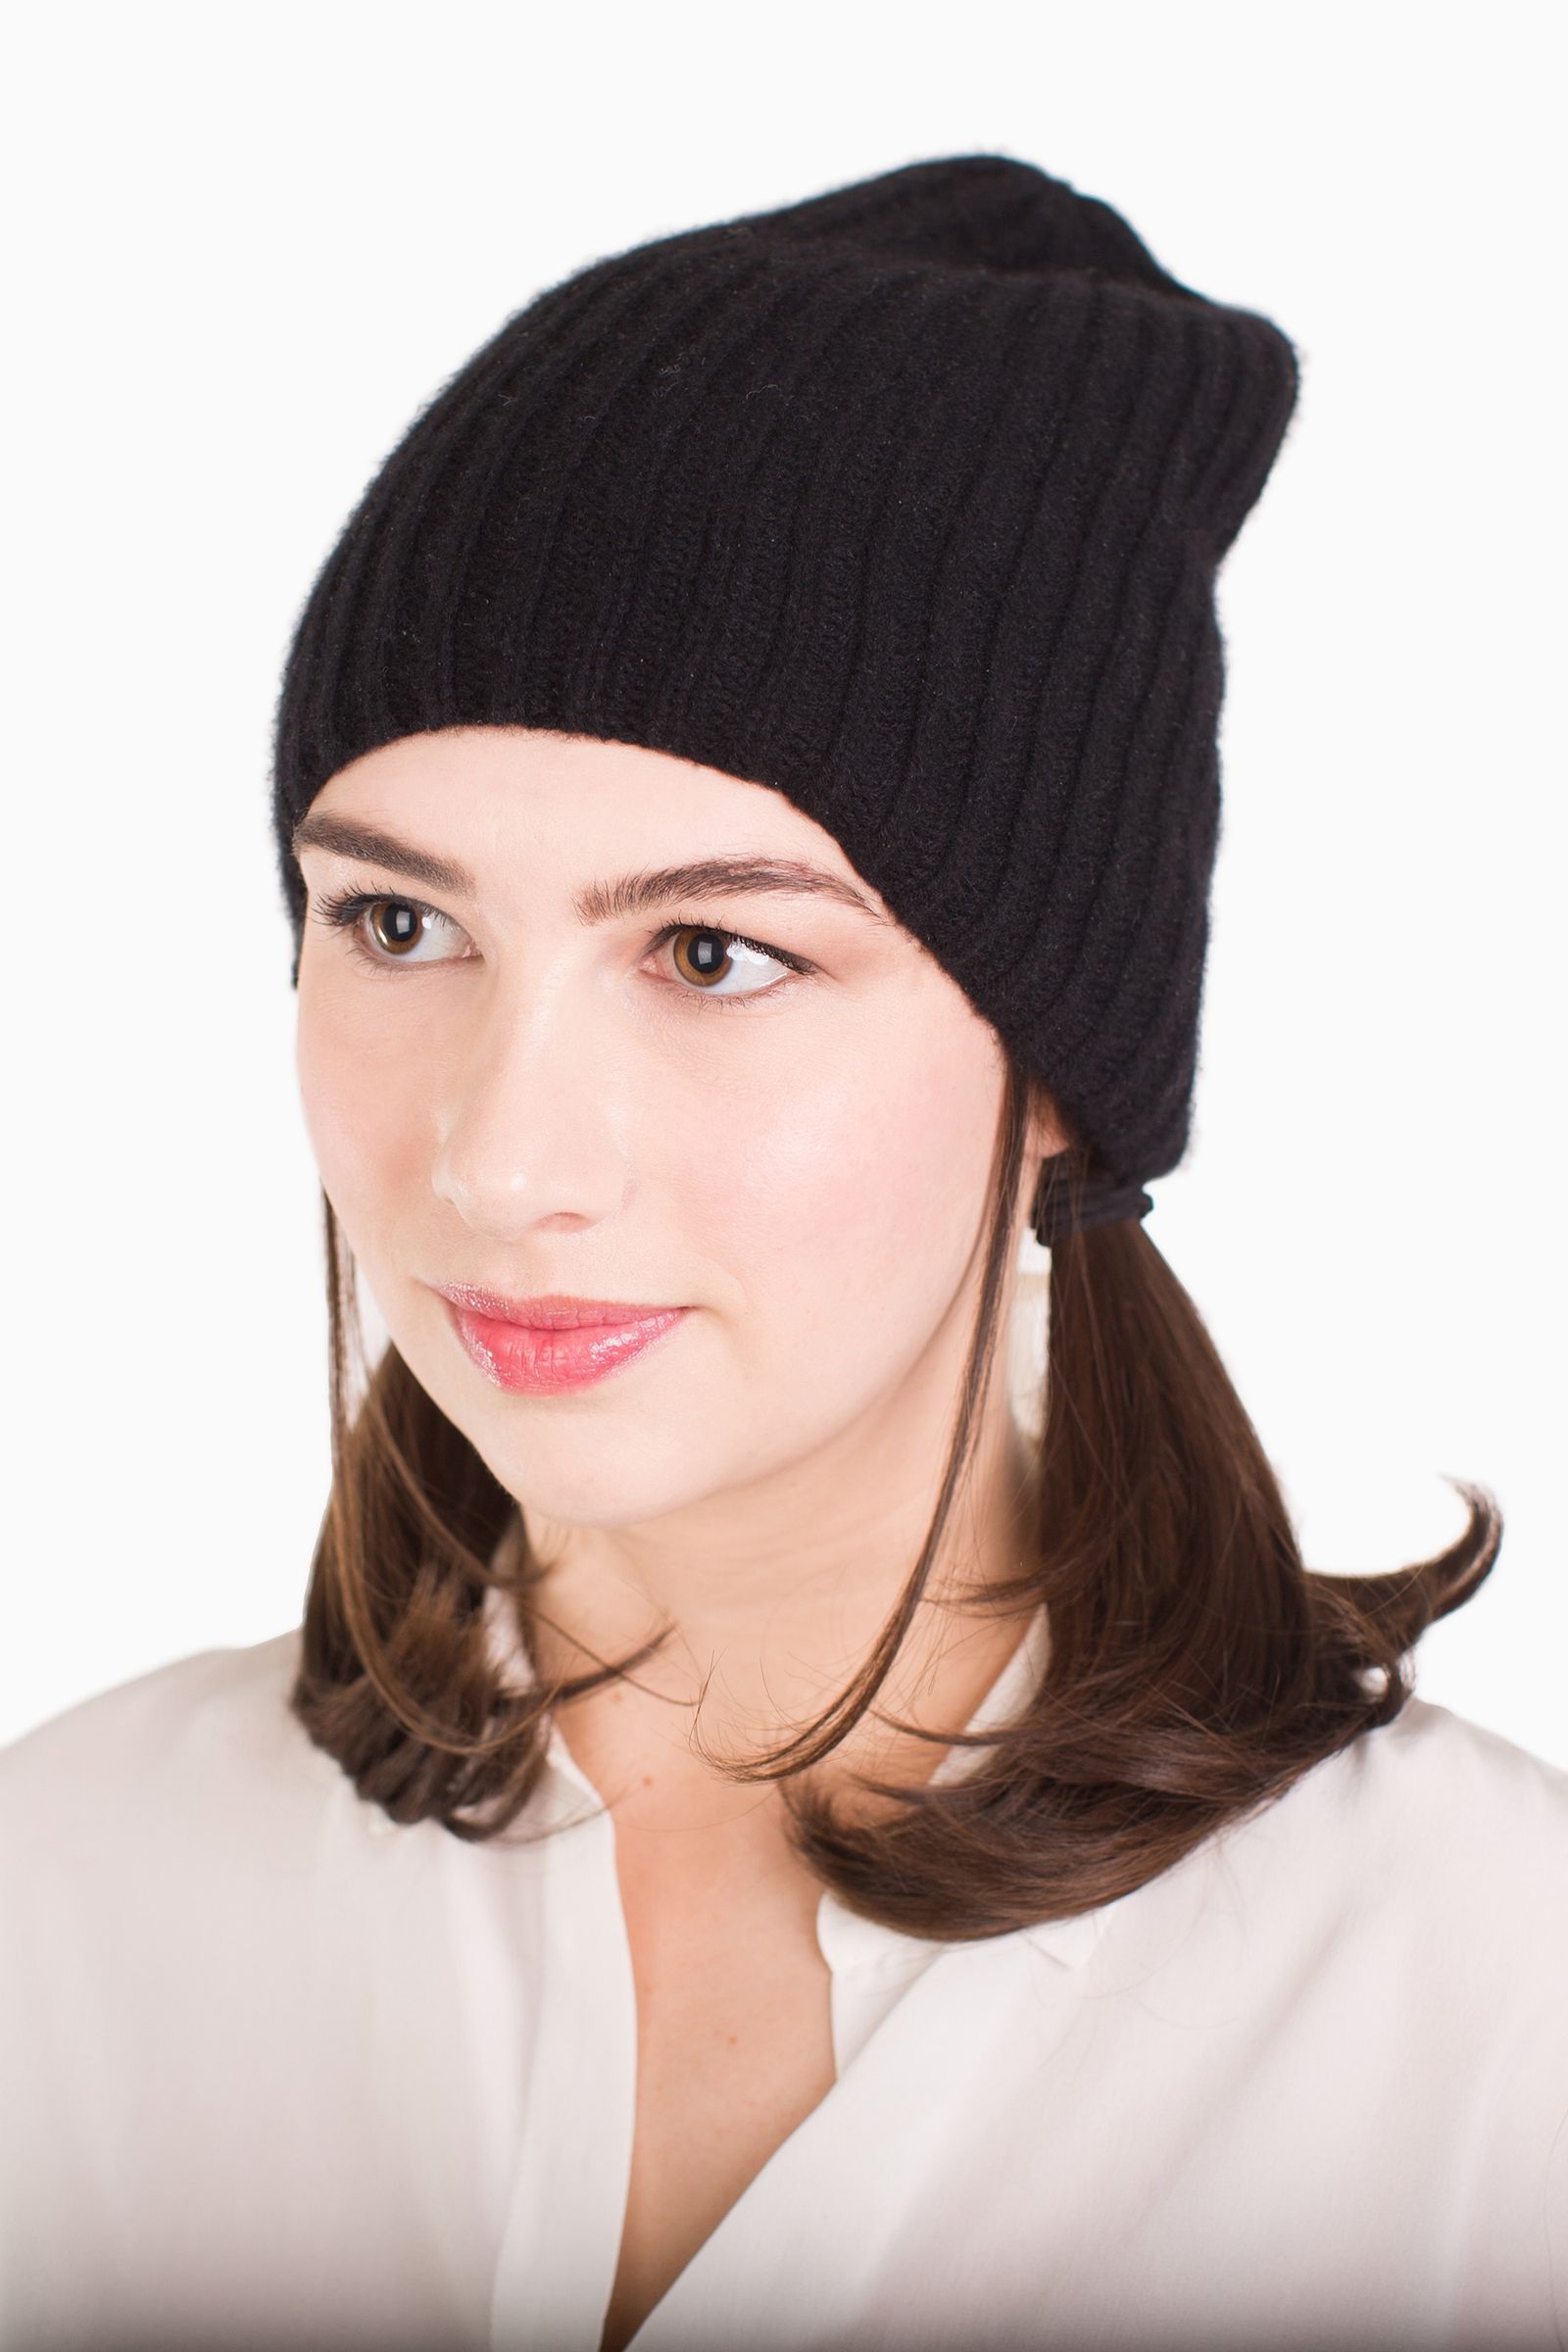 Pigtails Beanie Hairstyle